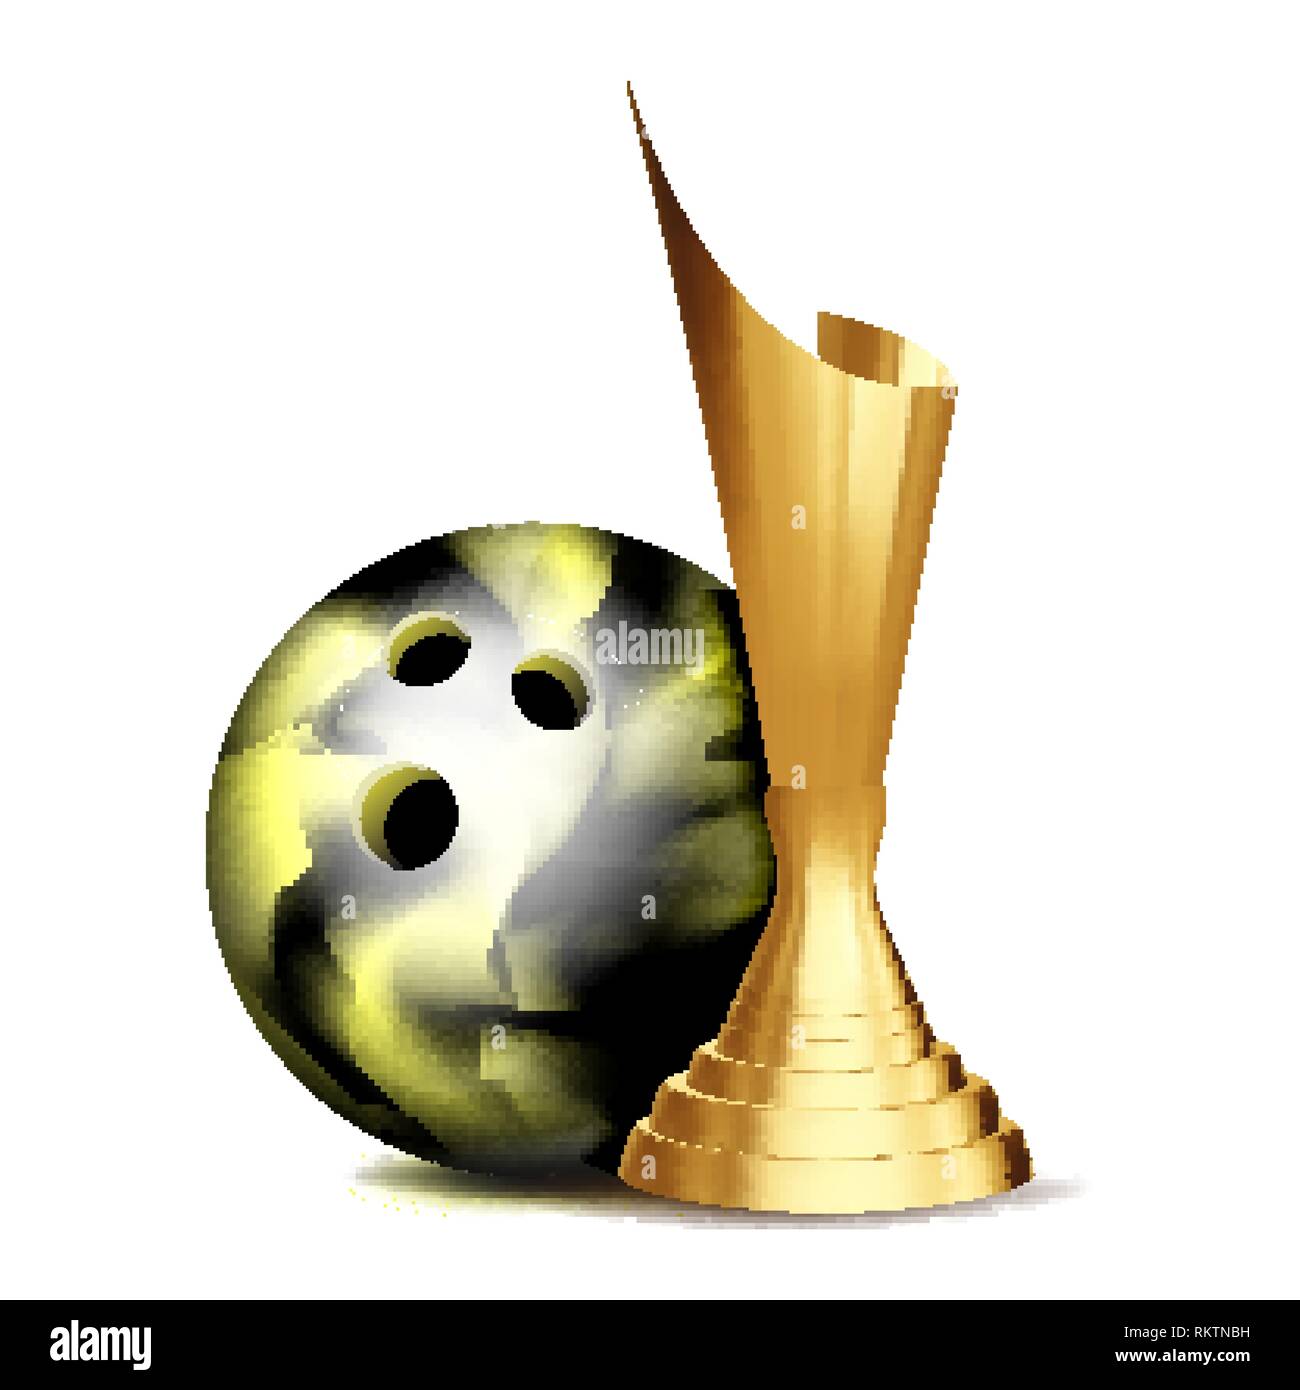 bowling trophy clipart icons